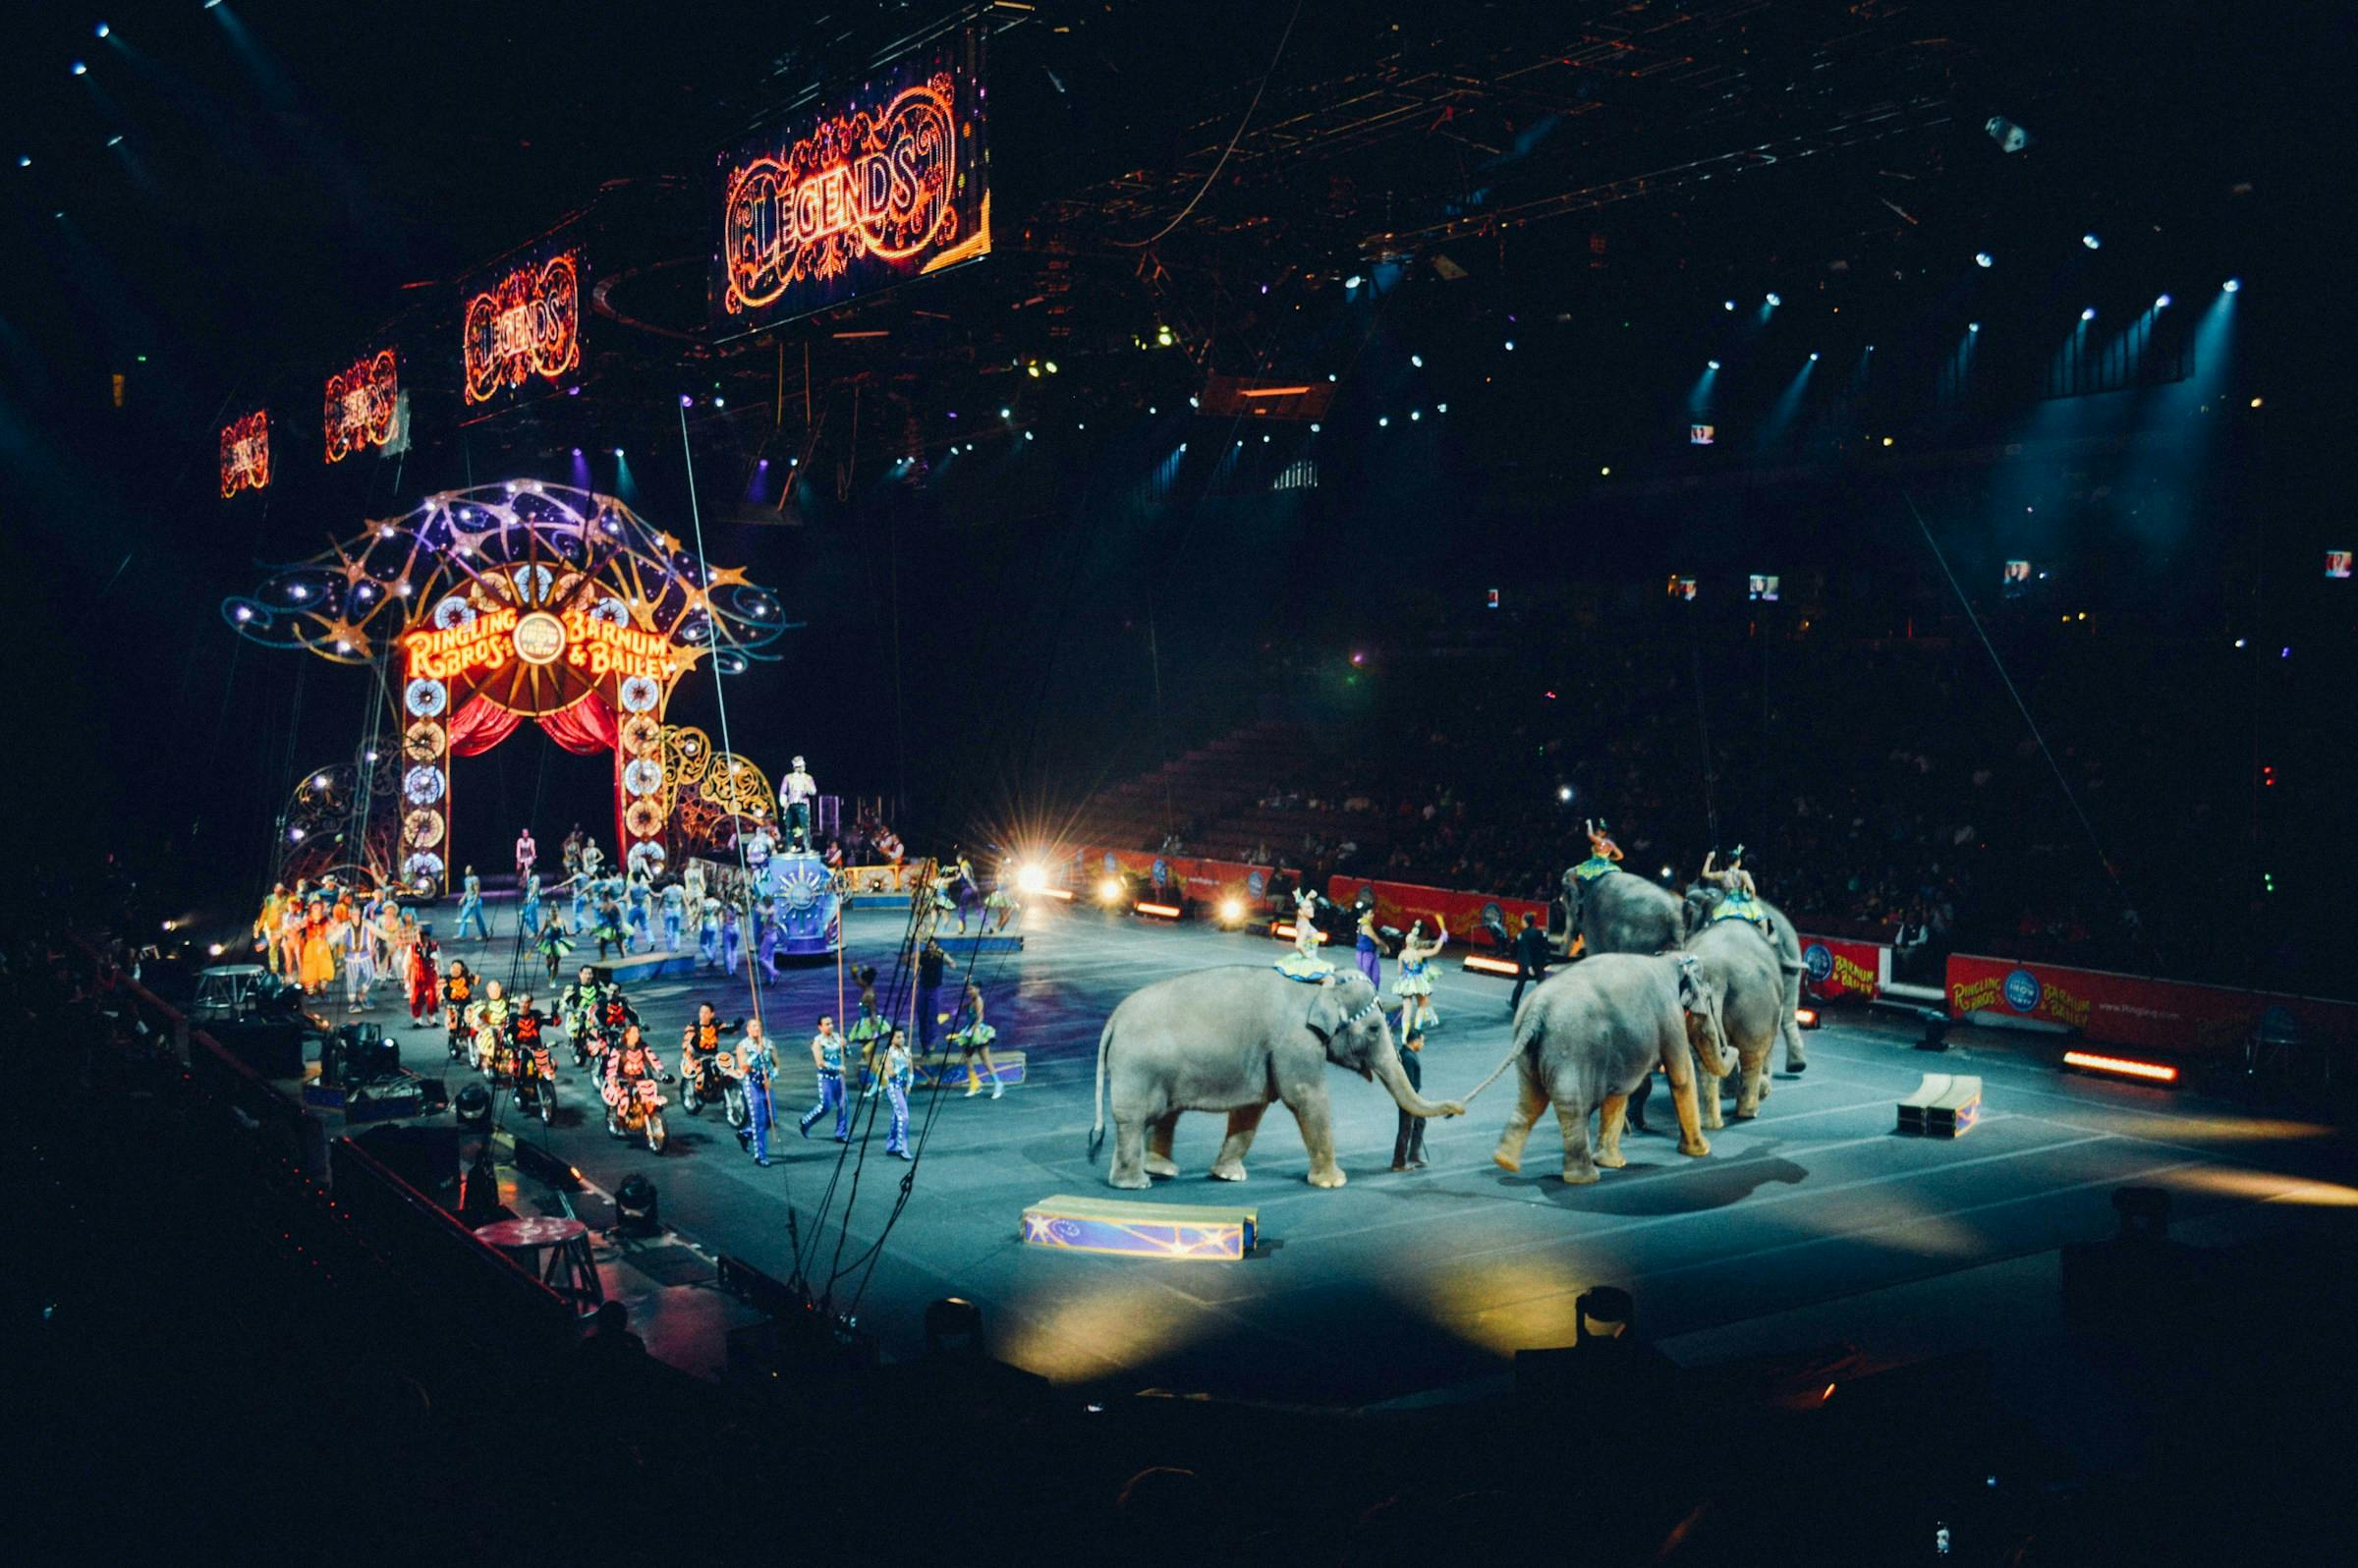 Thumbnail for Ringling Bros. and Barnum & Bailey Circus - St Louis